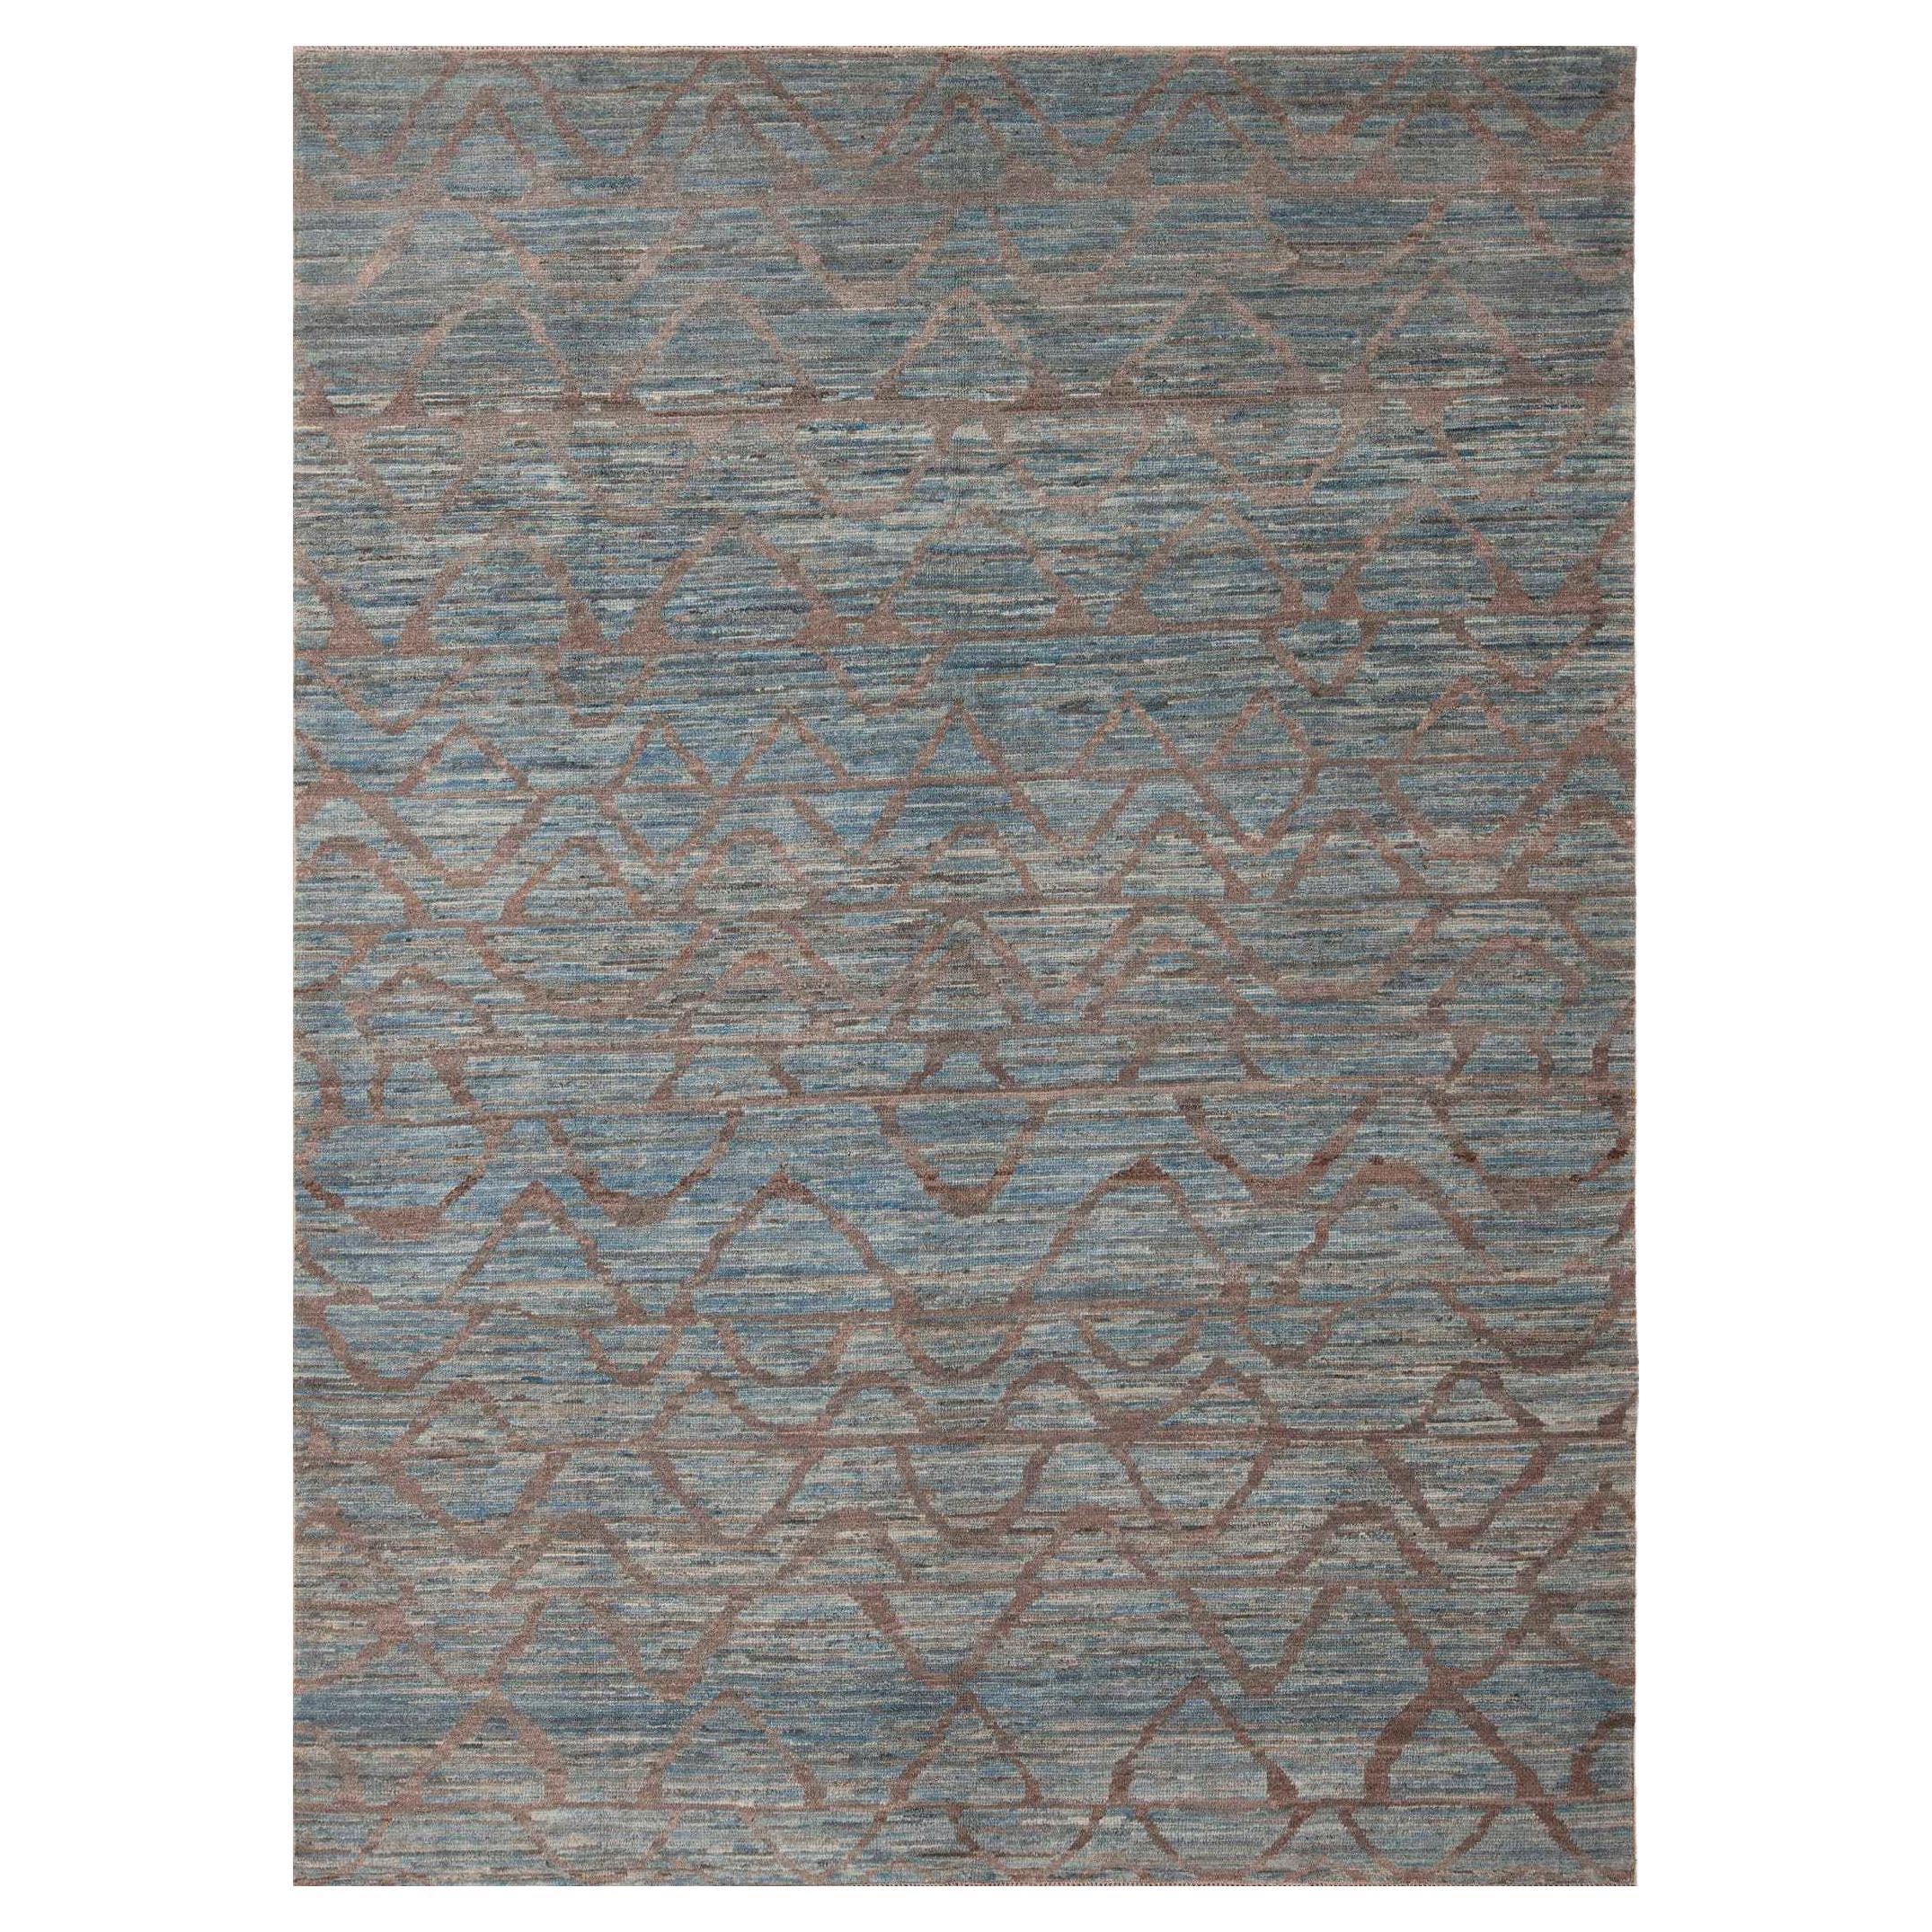 Nazmiyal Collection Blue And Brown Abstract Wavy Design Modern Rug 6'11" x 9'8" For Sale